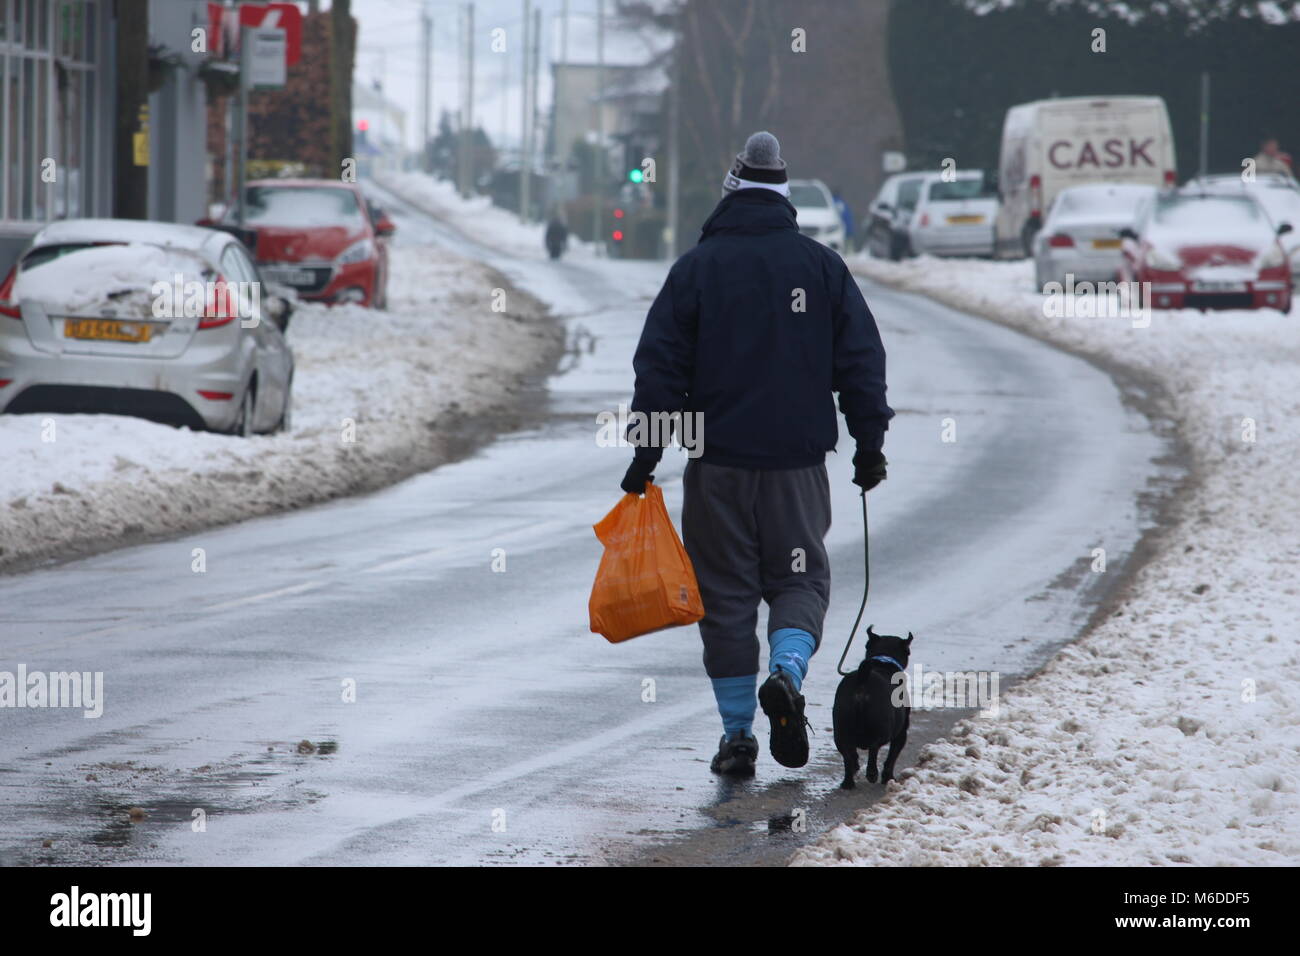 Llantwit Fardre, Pontypridd, Wales, UK - March 03 2018: A man walks his dog home from a store along a snowy, slushy street. Abandoned vehicles parked up on the side of the road in the background. Credit: Elizabeth Foster/Alamy Live News Stock Photo